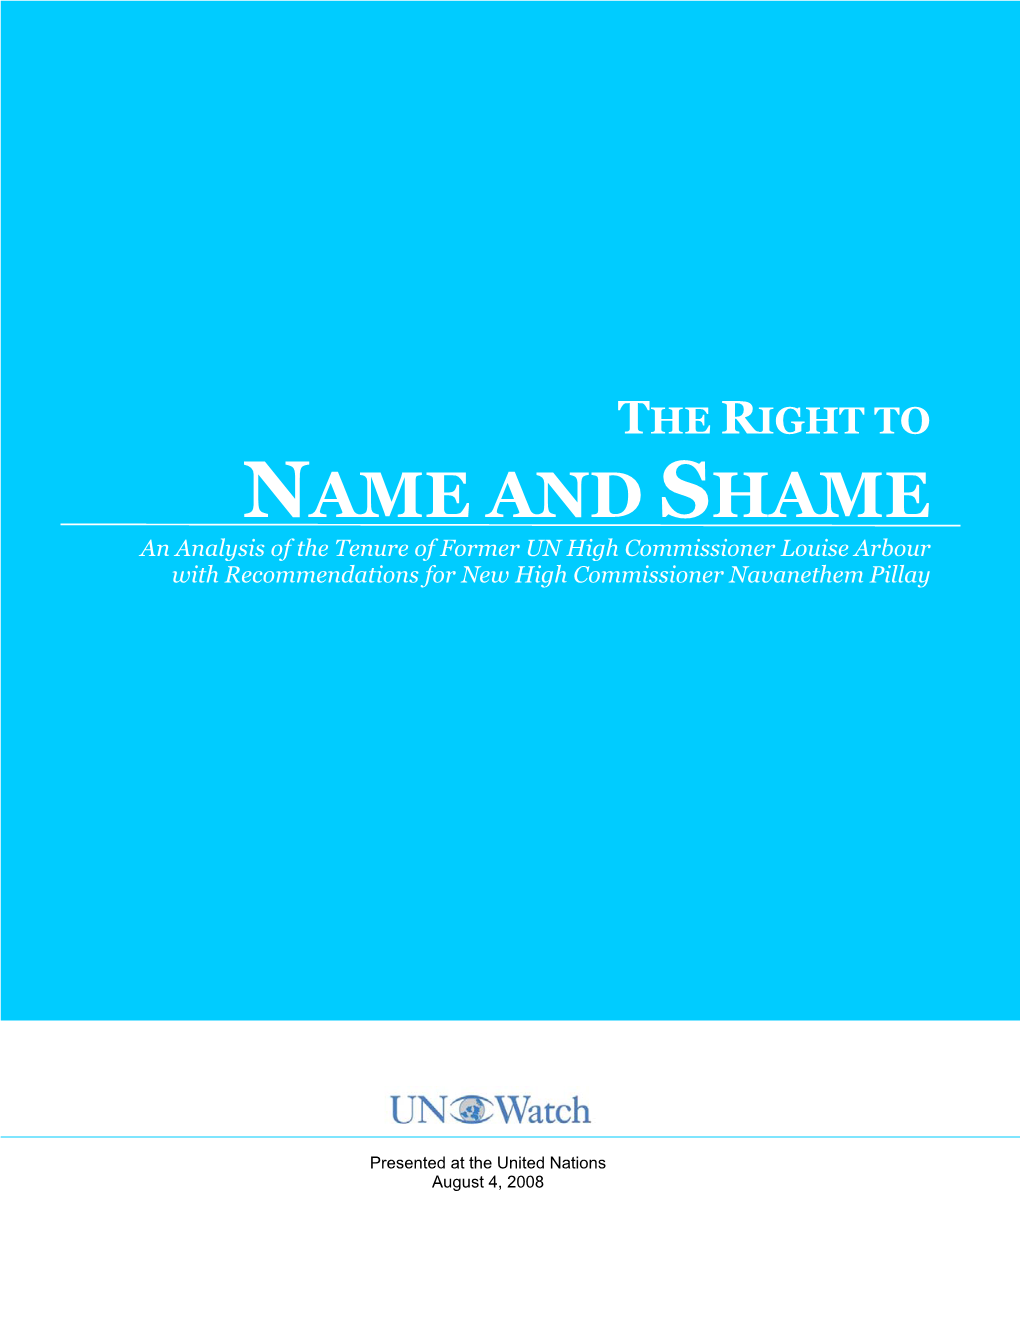 NAME and SHAME an Analysis of the Tenure of Former UN High Commissioner Louise Arbour with Recommendations for New High Commissioner Navanethem Pillay